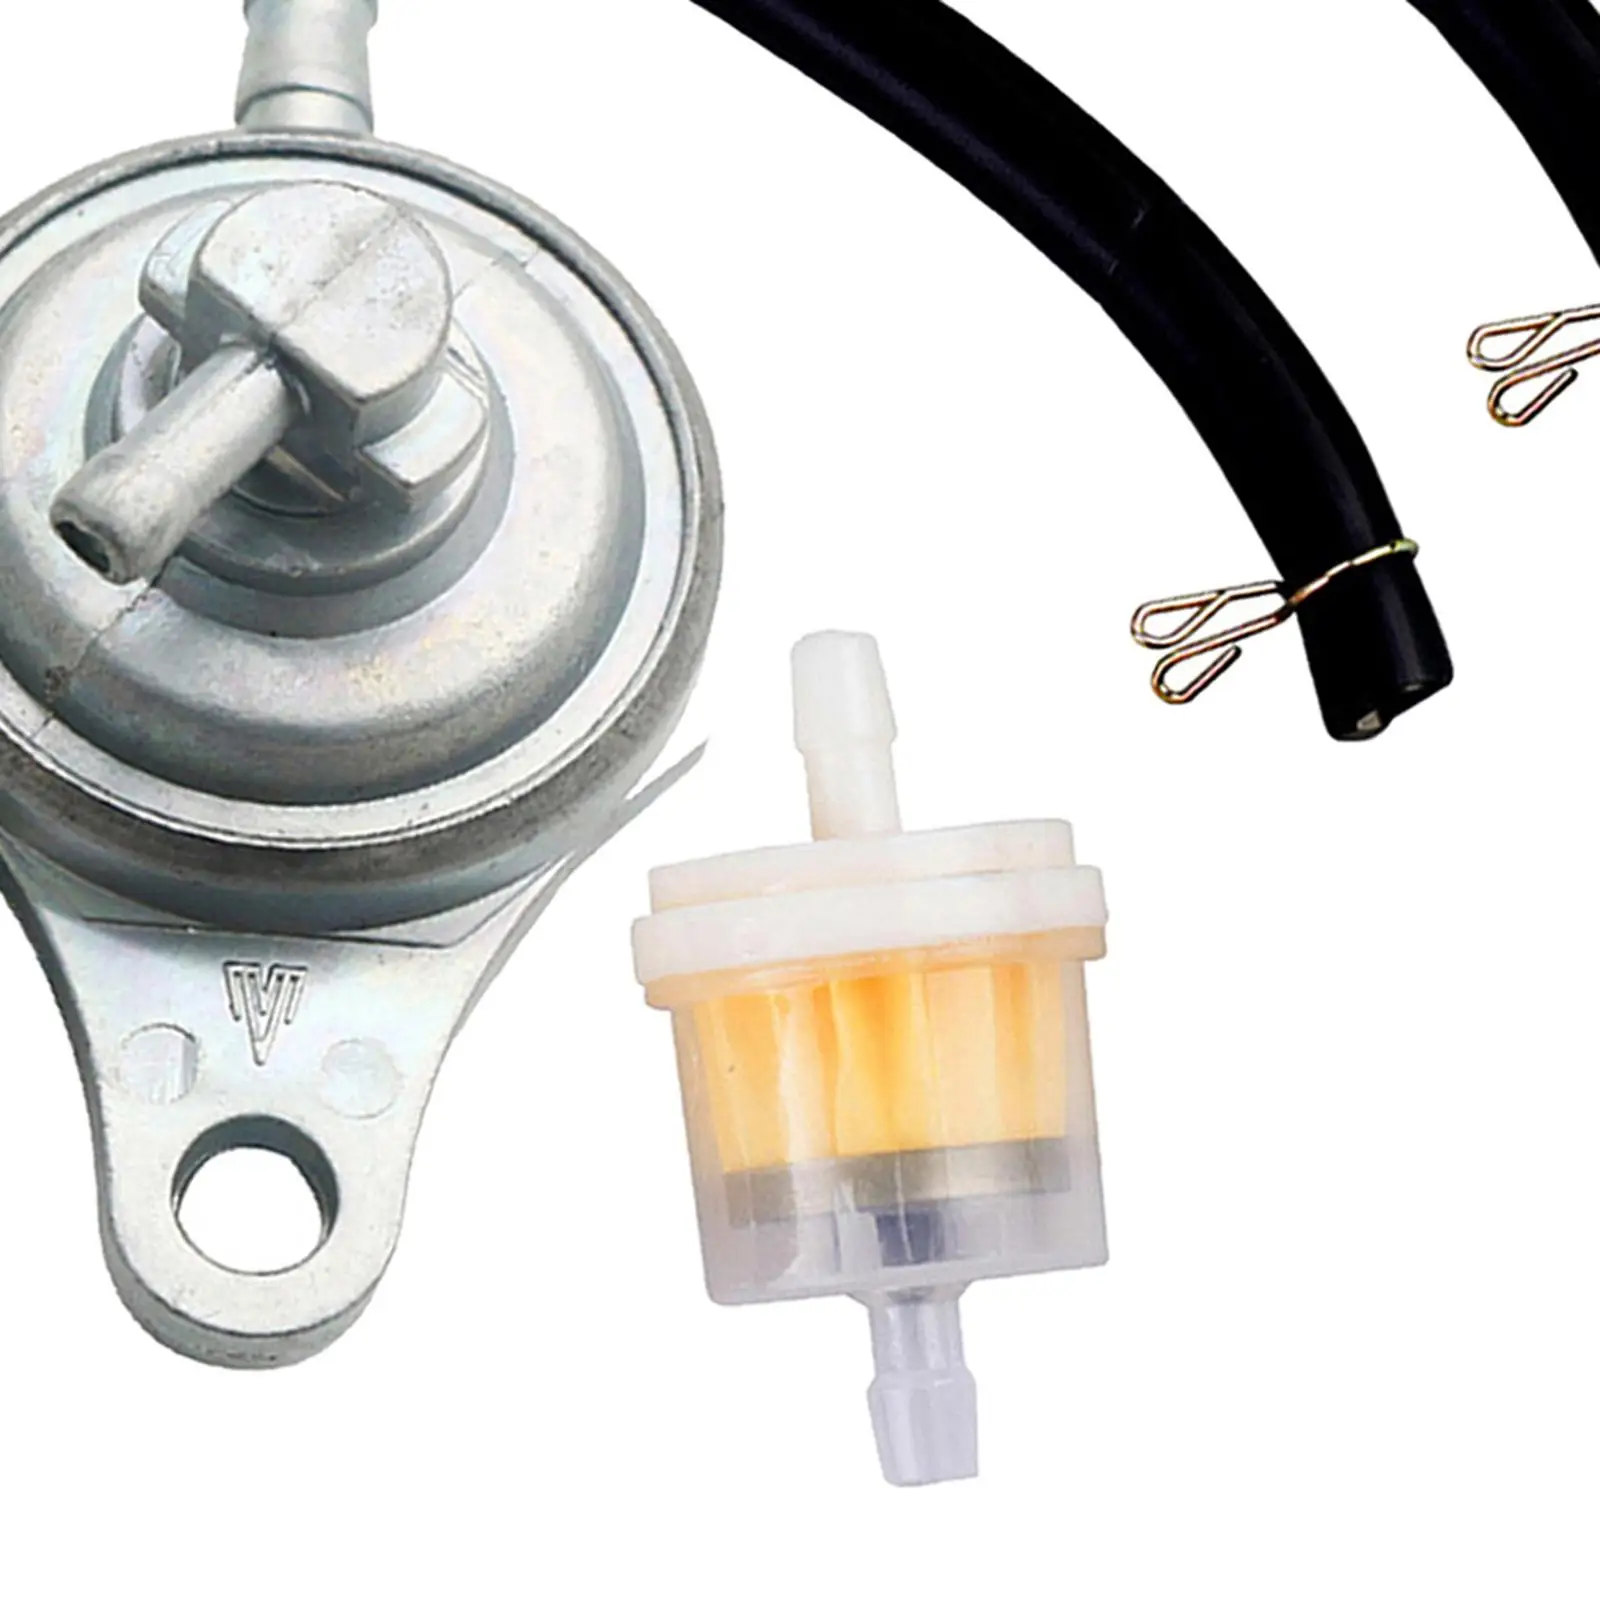 Inline Fuel Valve Petcock 3-Hole Fit for 50cc 125cc 150cc Gy6 Engine Moped